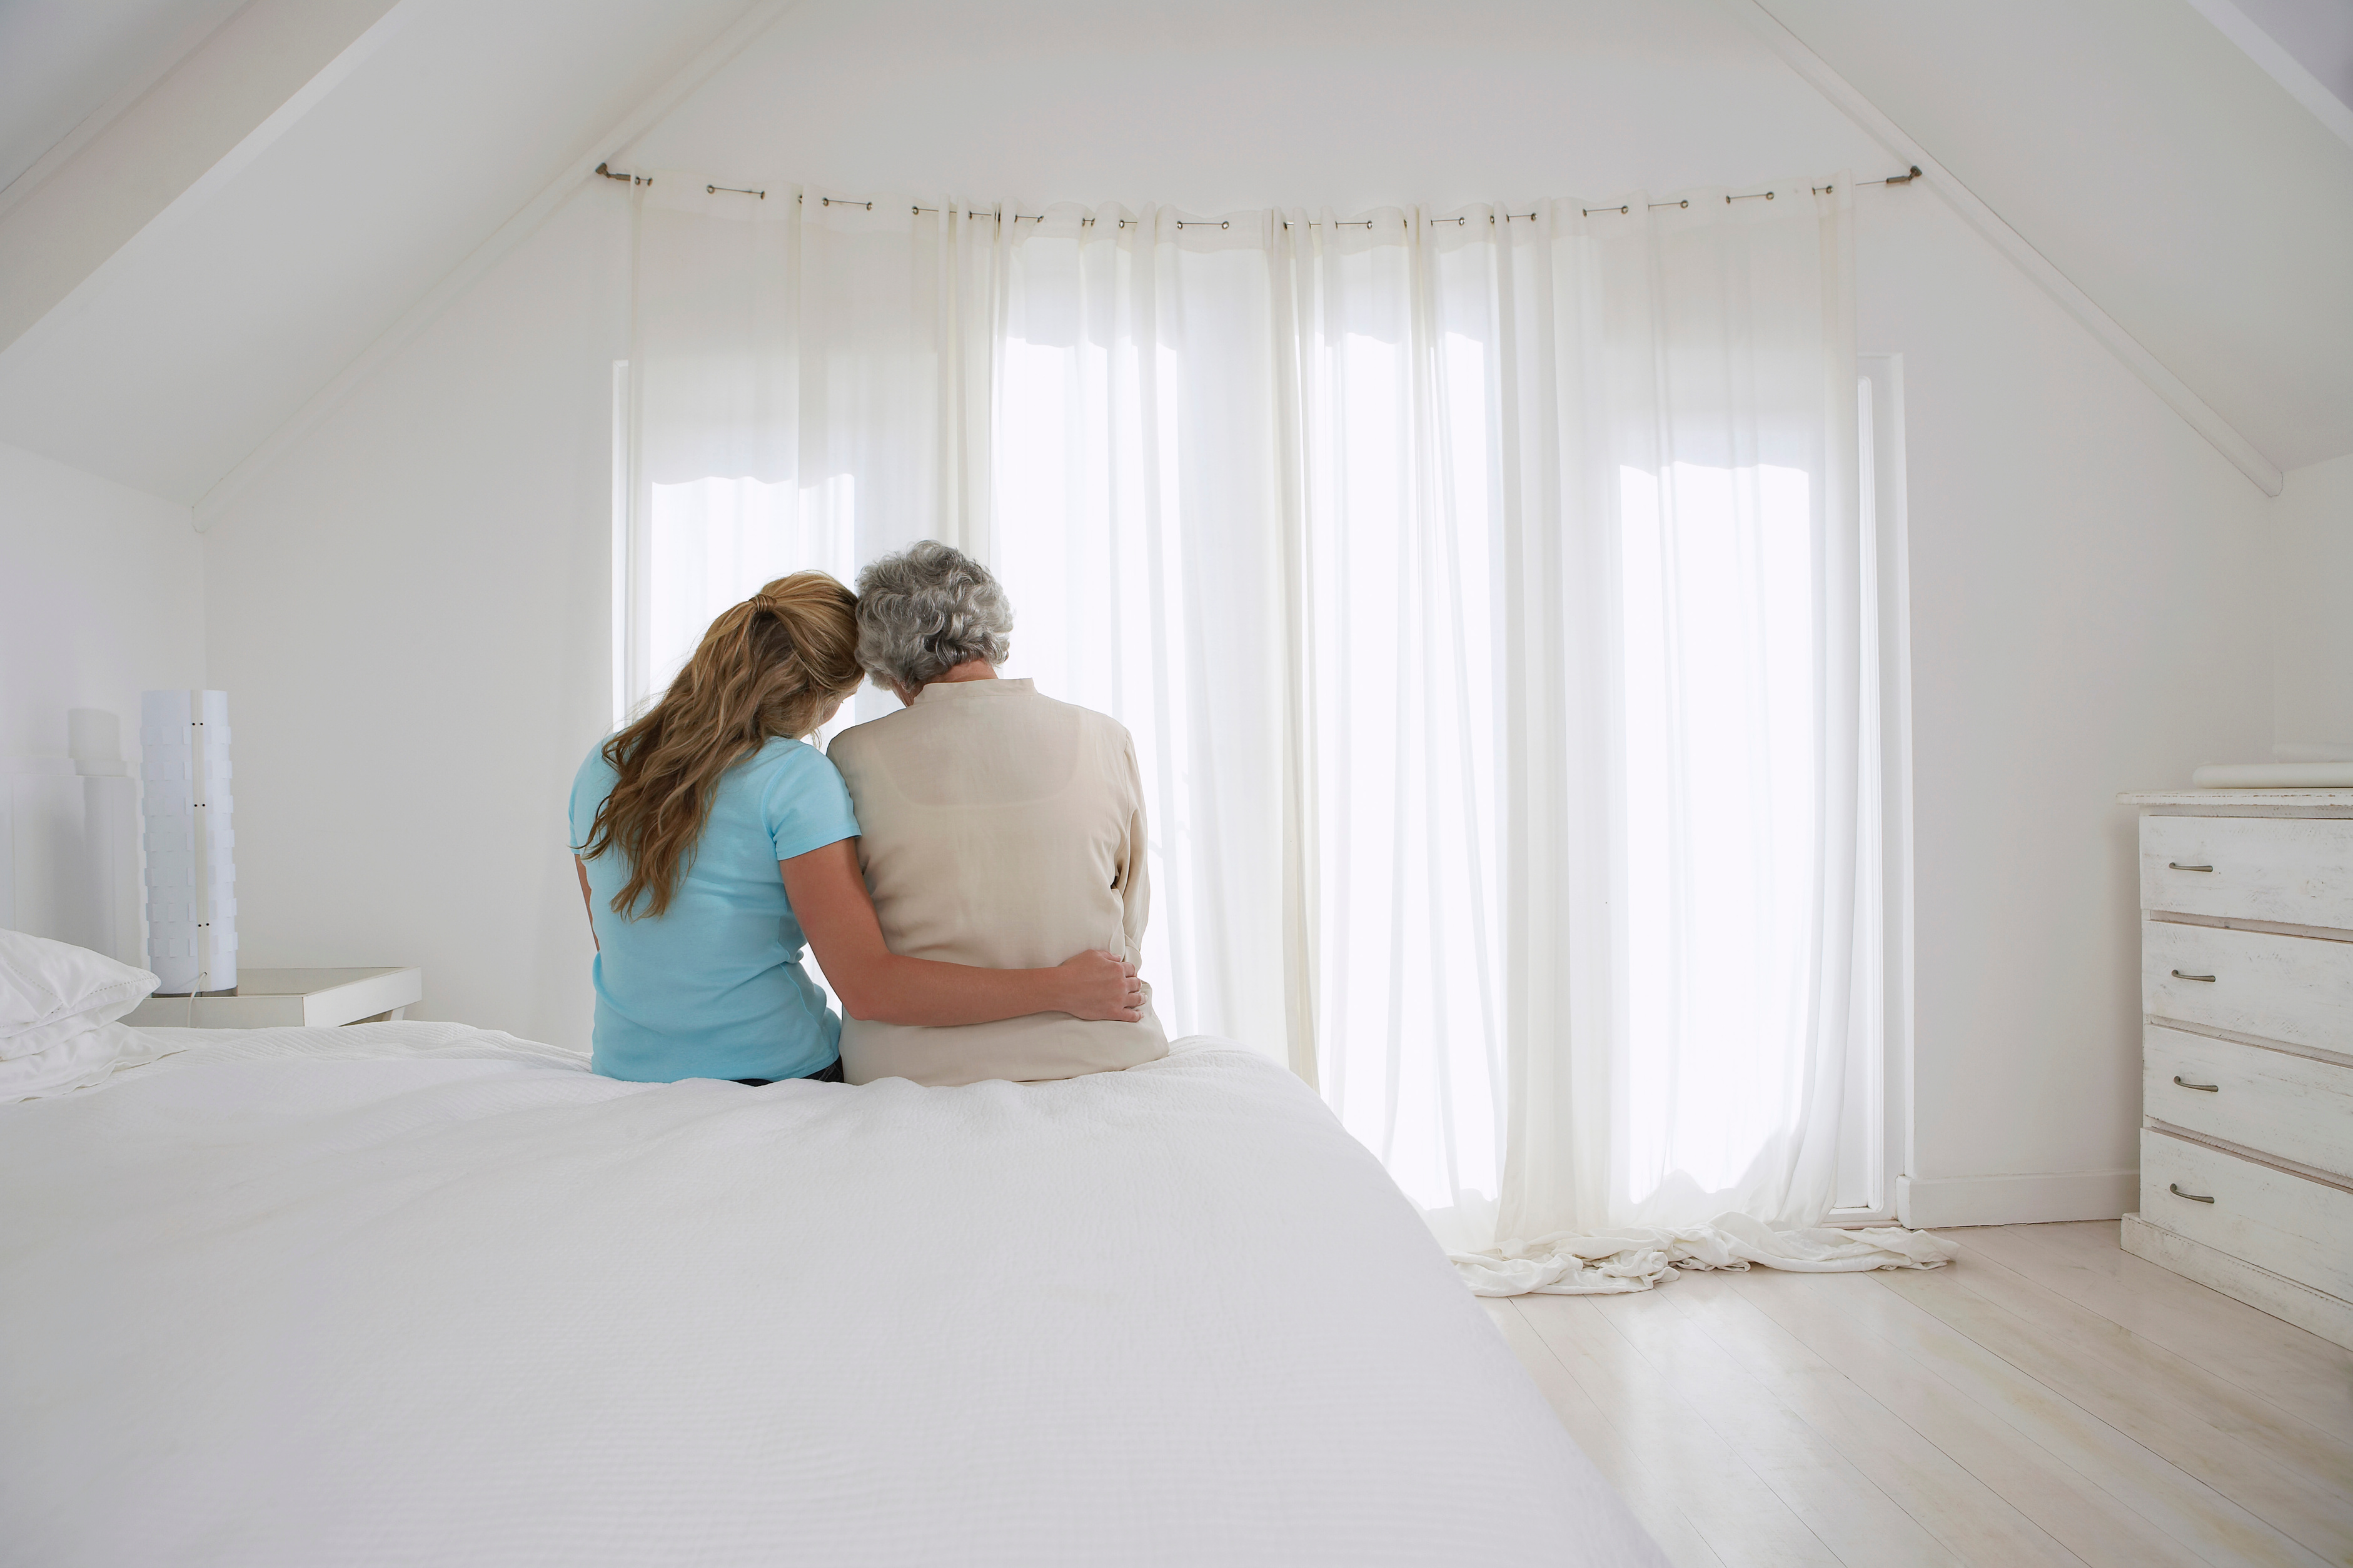 Rear view of adult daughter with her arm around mother in white bedroom